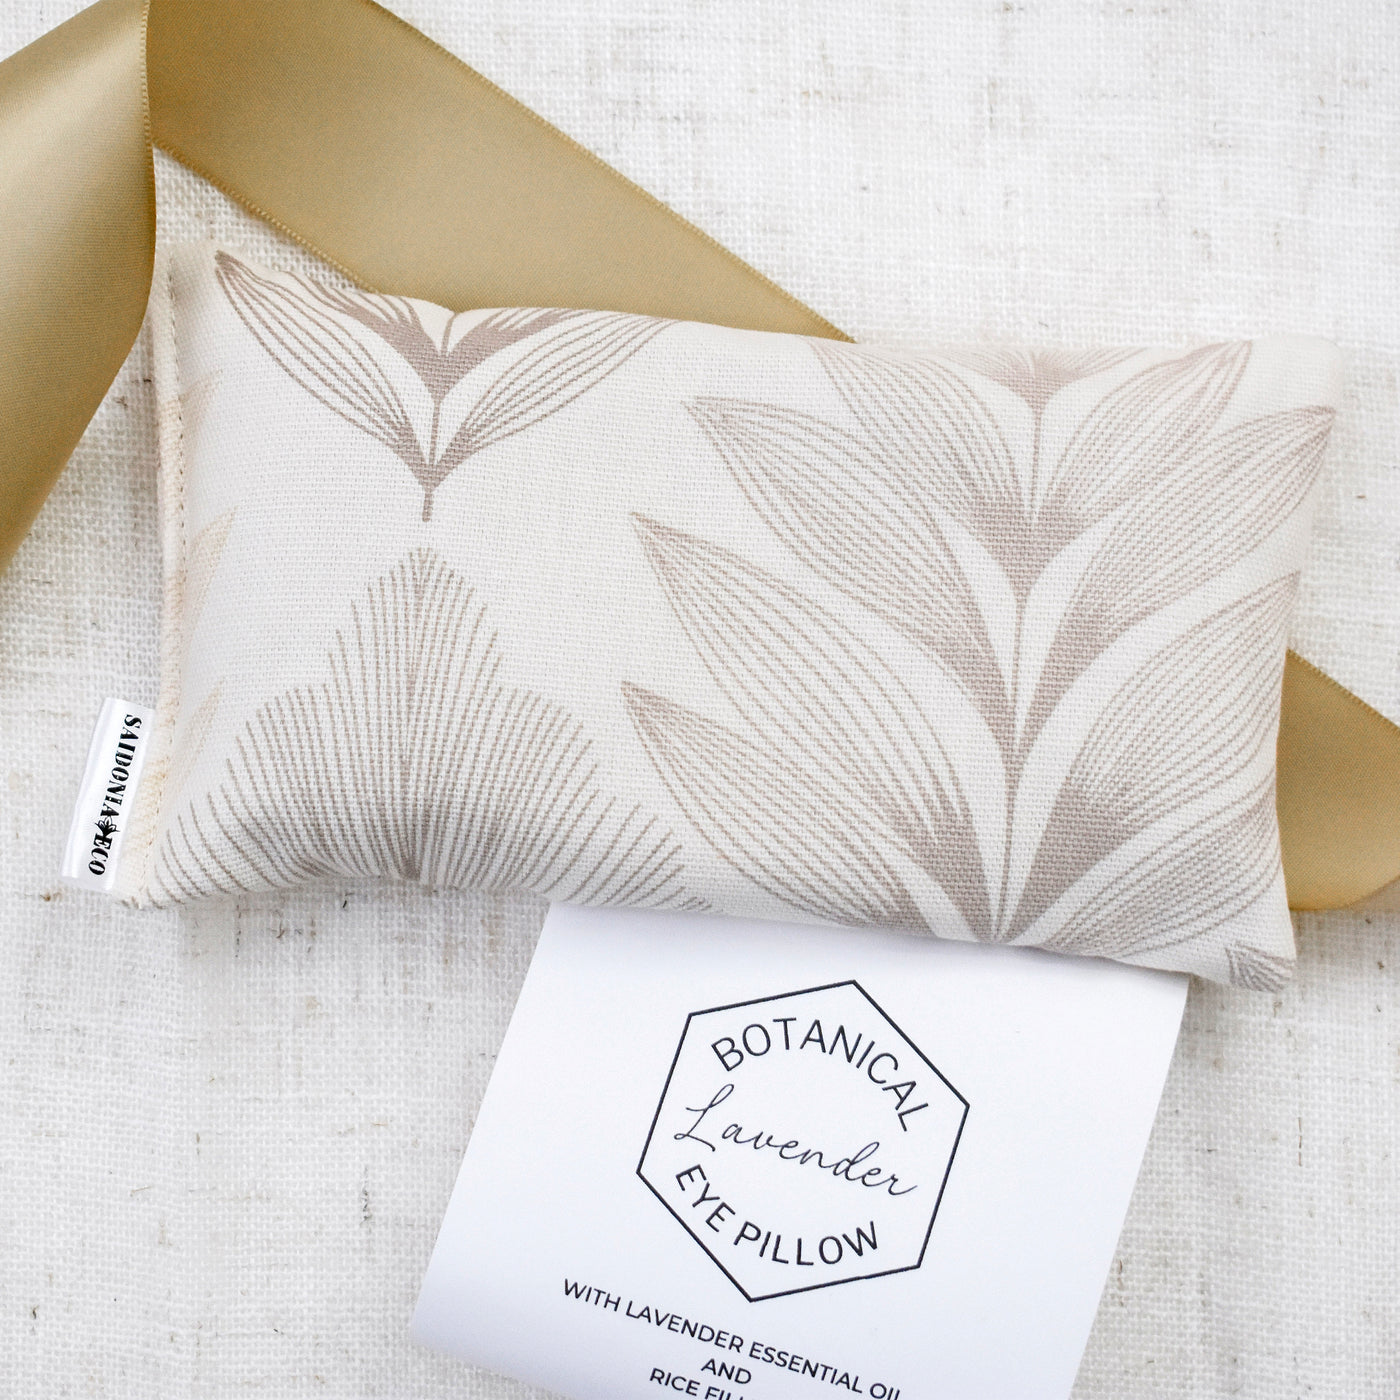 Enjoy this carefully curated gift box with all the makings for an unforgettable self-care day or night. Close up of Weighted Botanical Lavender Eye Pillow